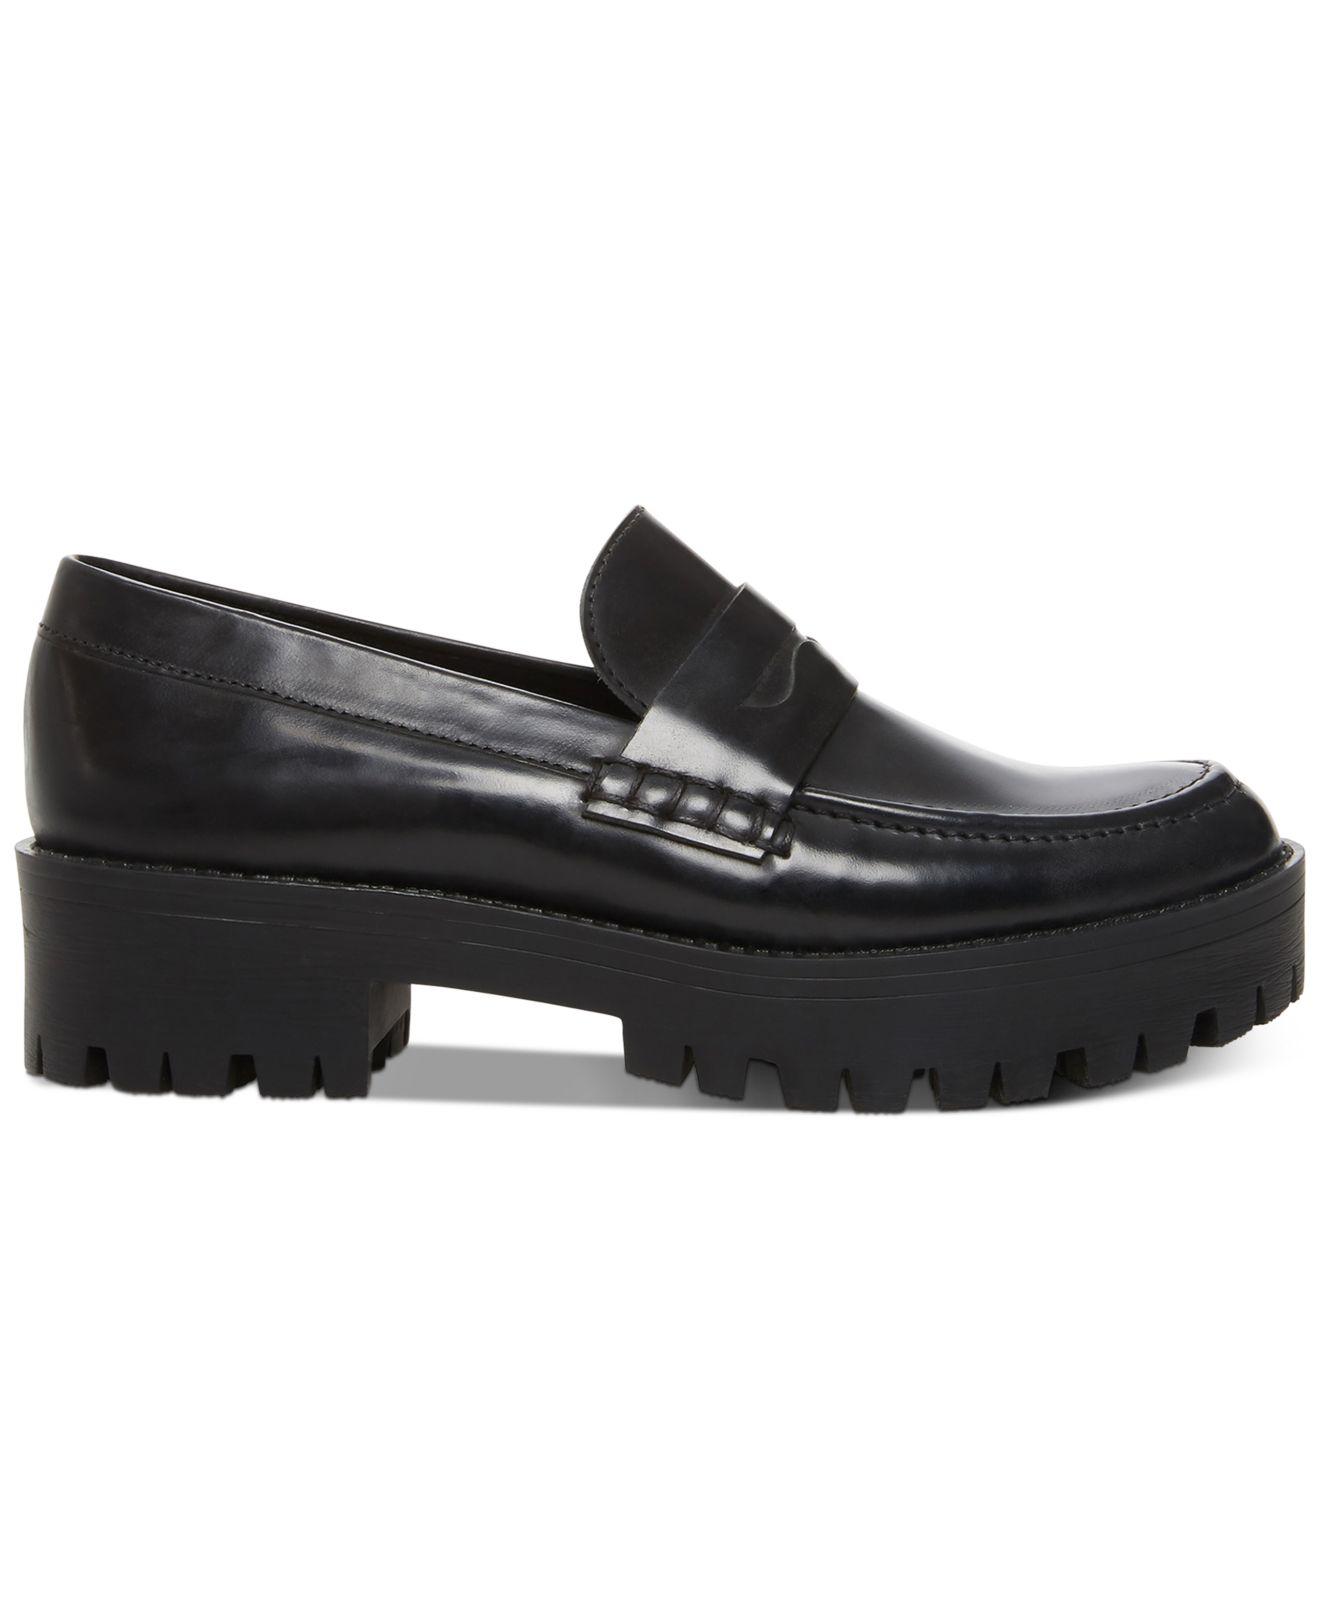 Steve Madden Crew Lug-sole Loafers in Black - Lyst